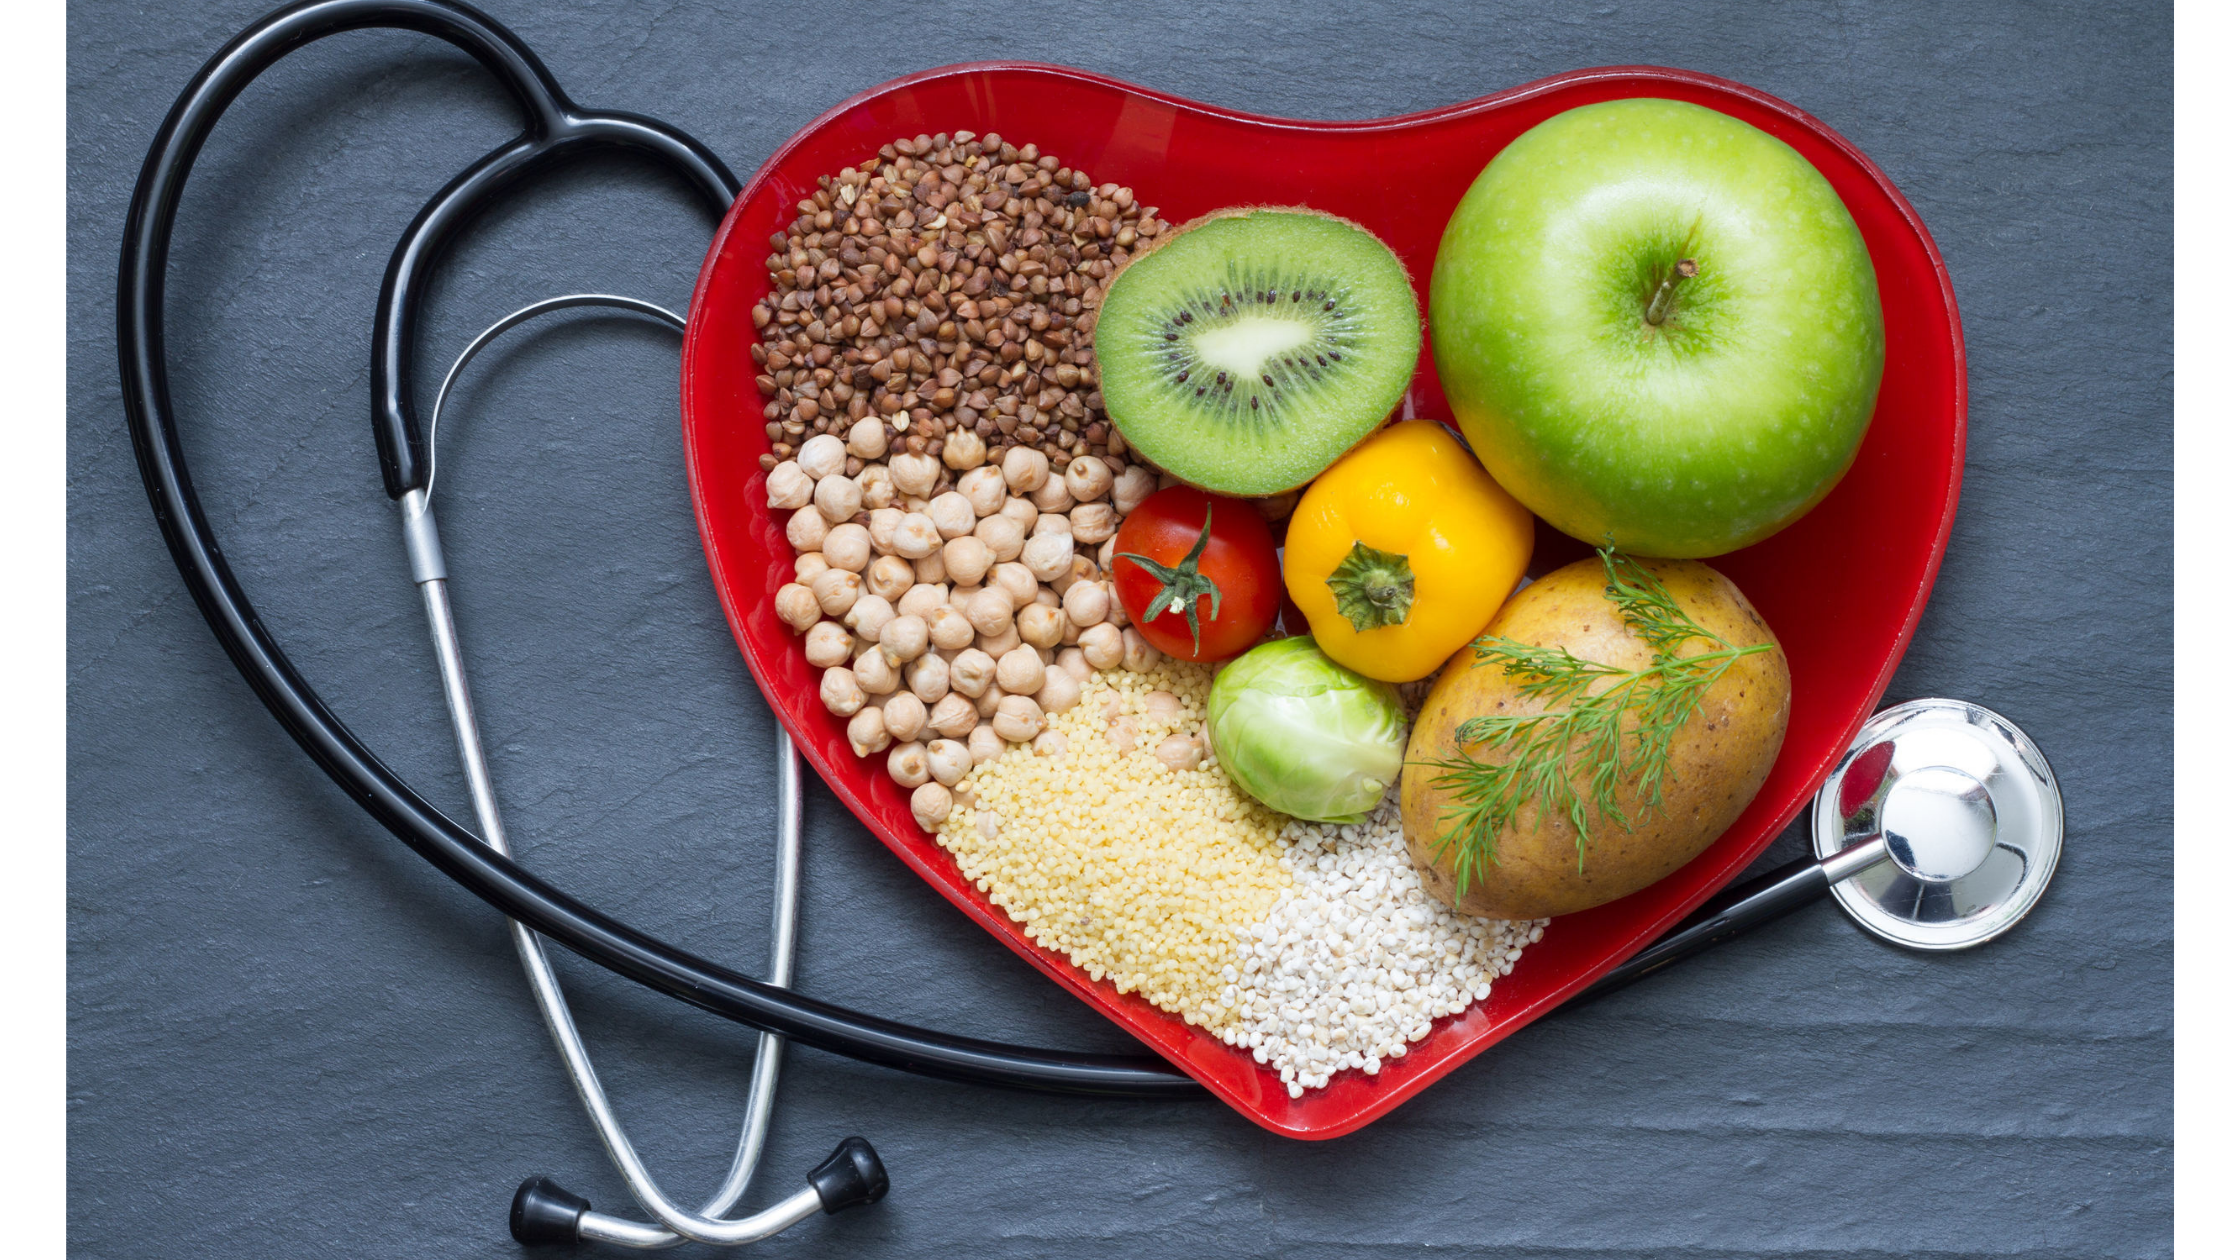 Diet Chart For High Blood Pressure Patients: Do's And Don'ts